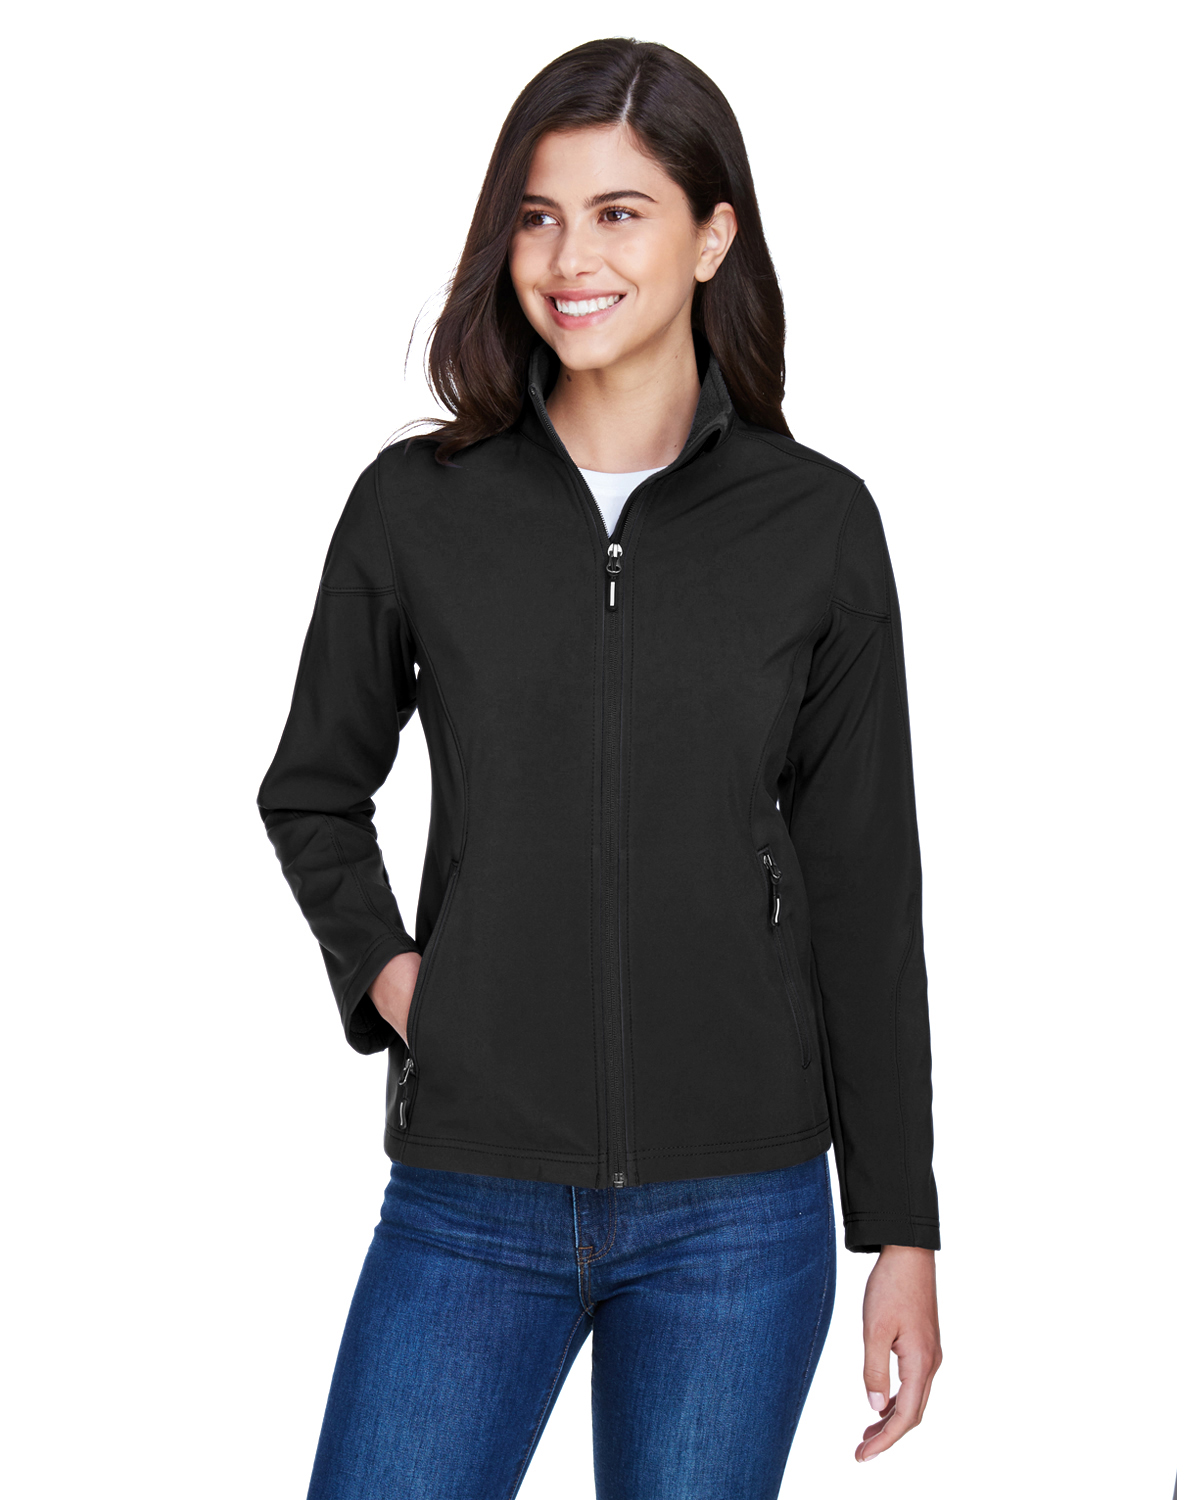 Ladies' Cruise Two-Layer Fleece Bonded Soft&nbsp;Shell Jacket - BLACK - XL - image 1 of 3